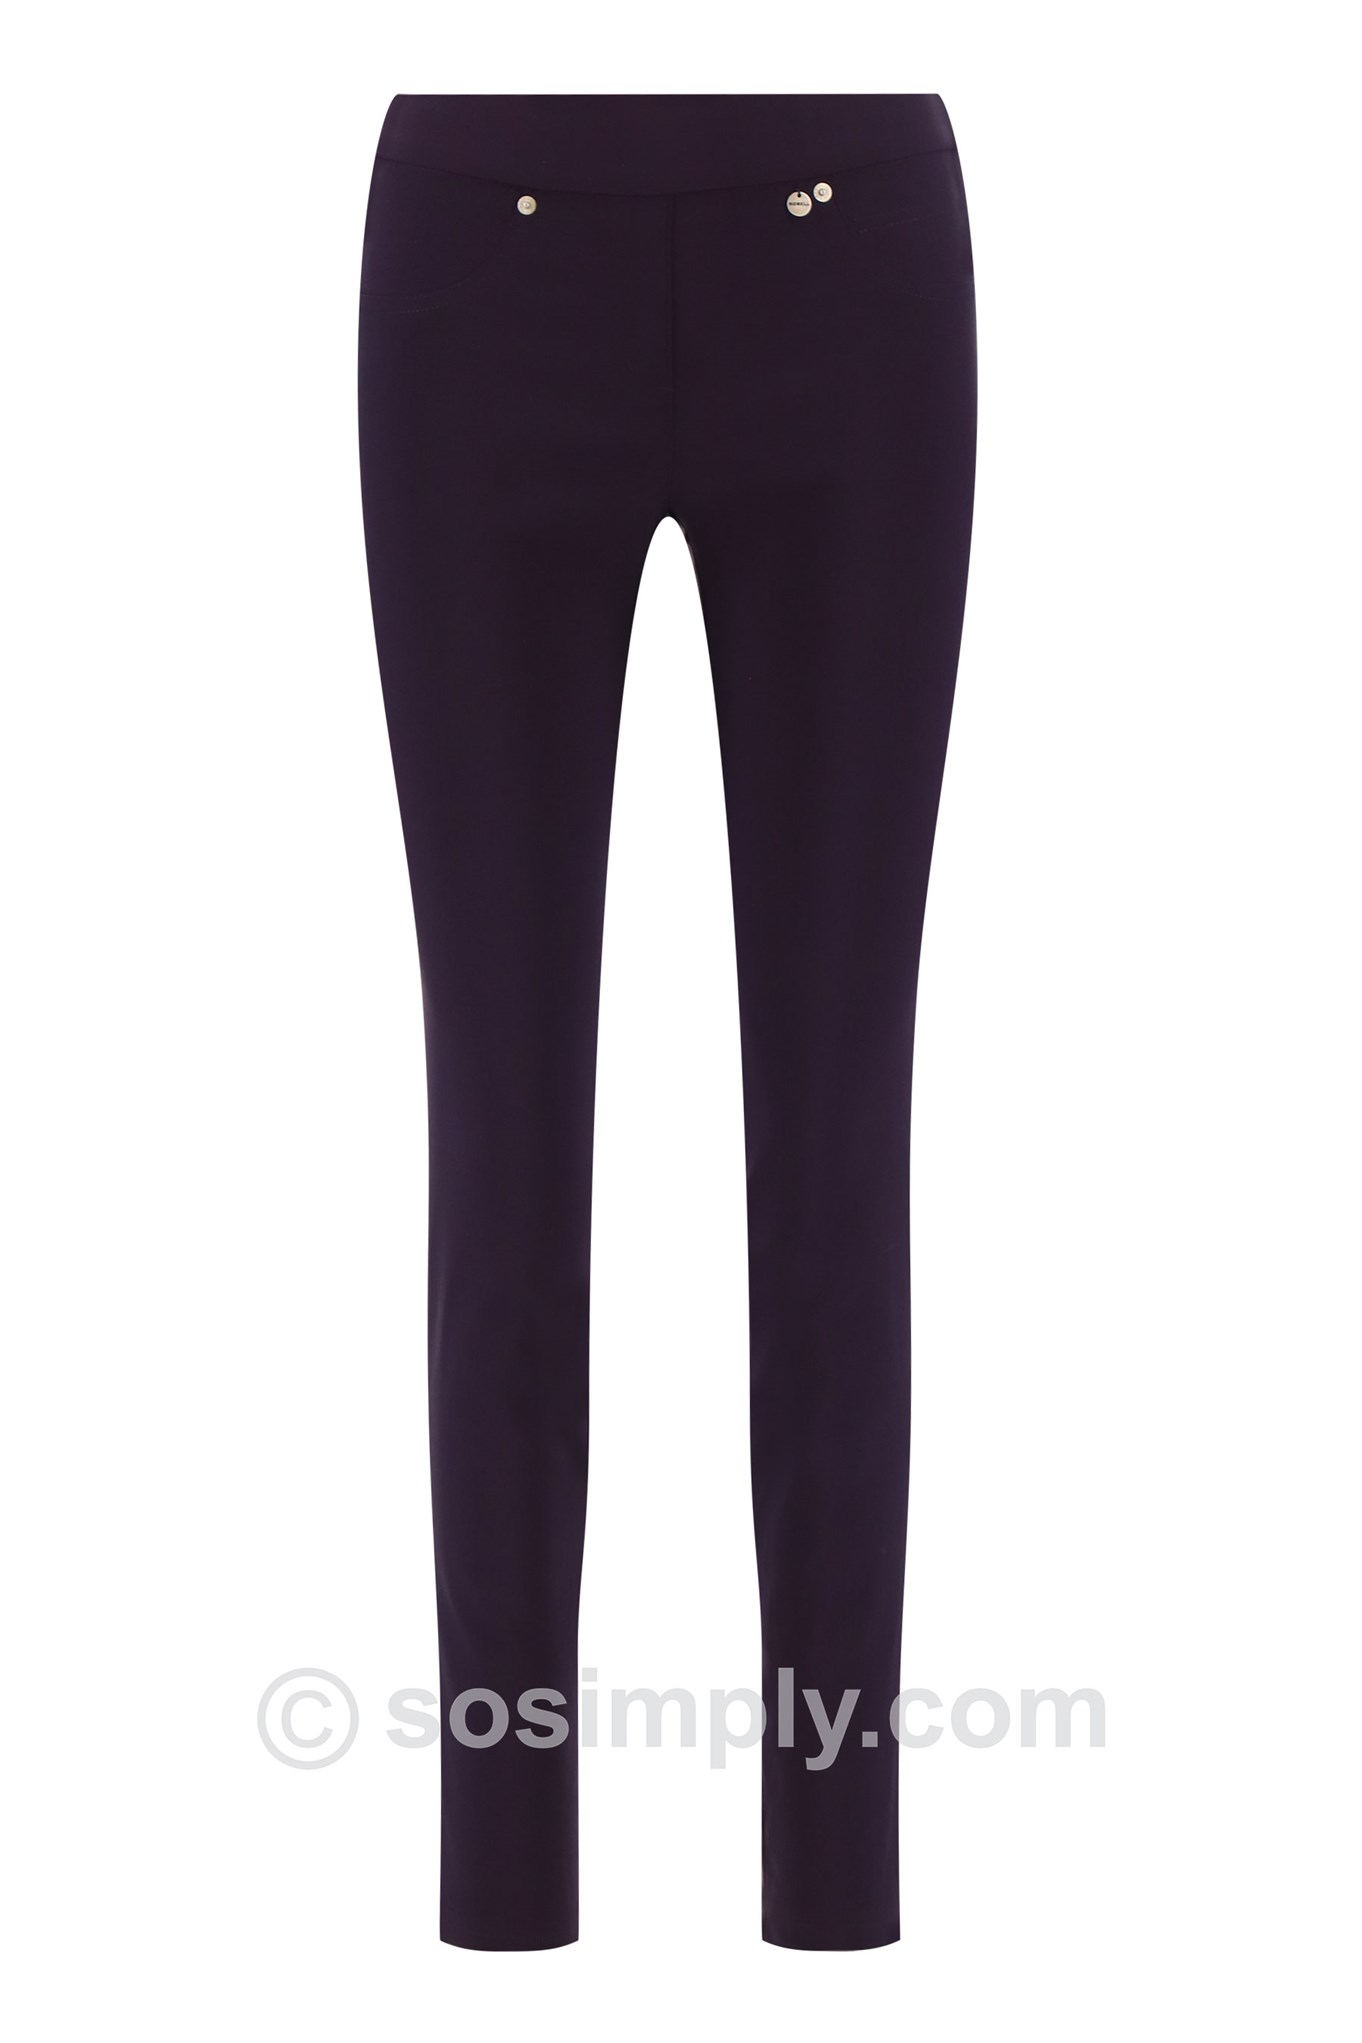 Robell Rose Jean Style trouser in Loganberry